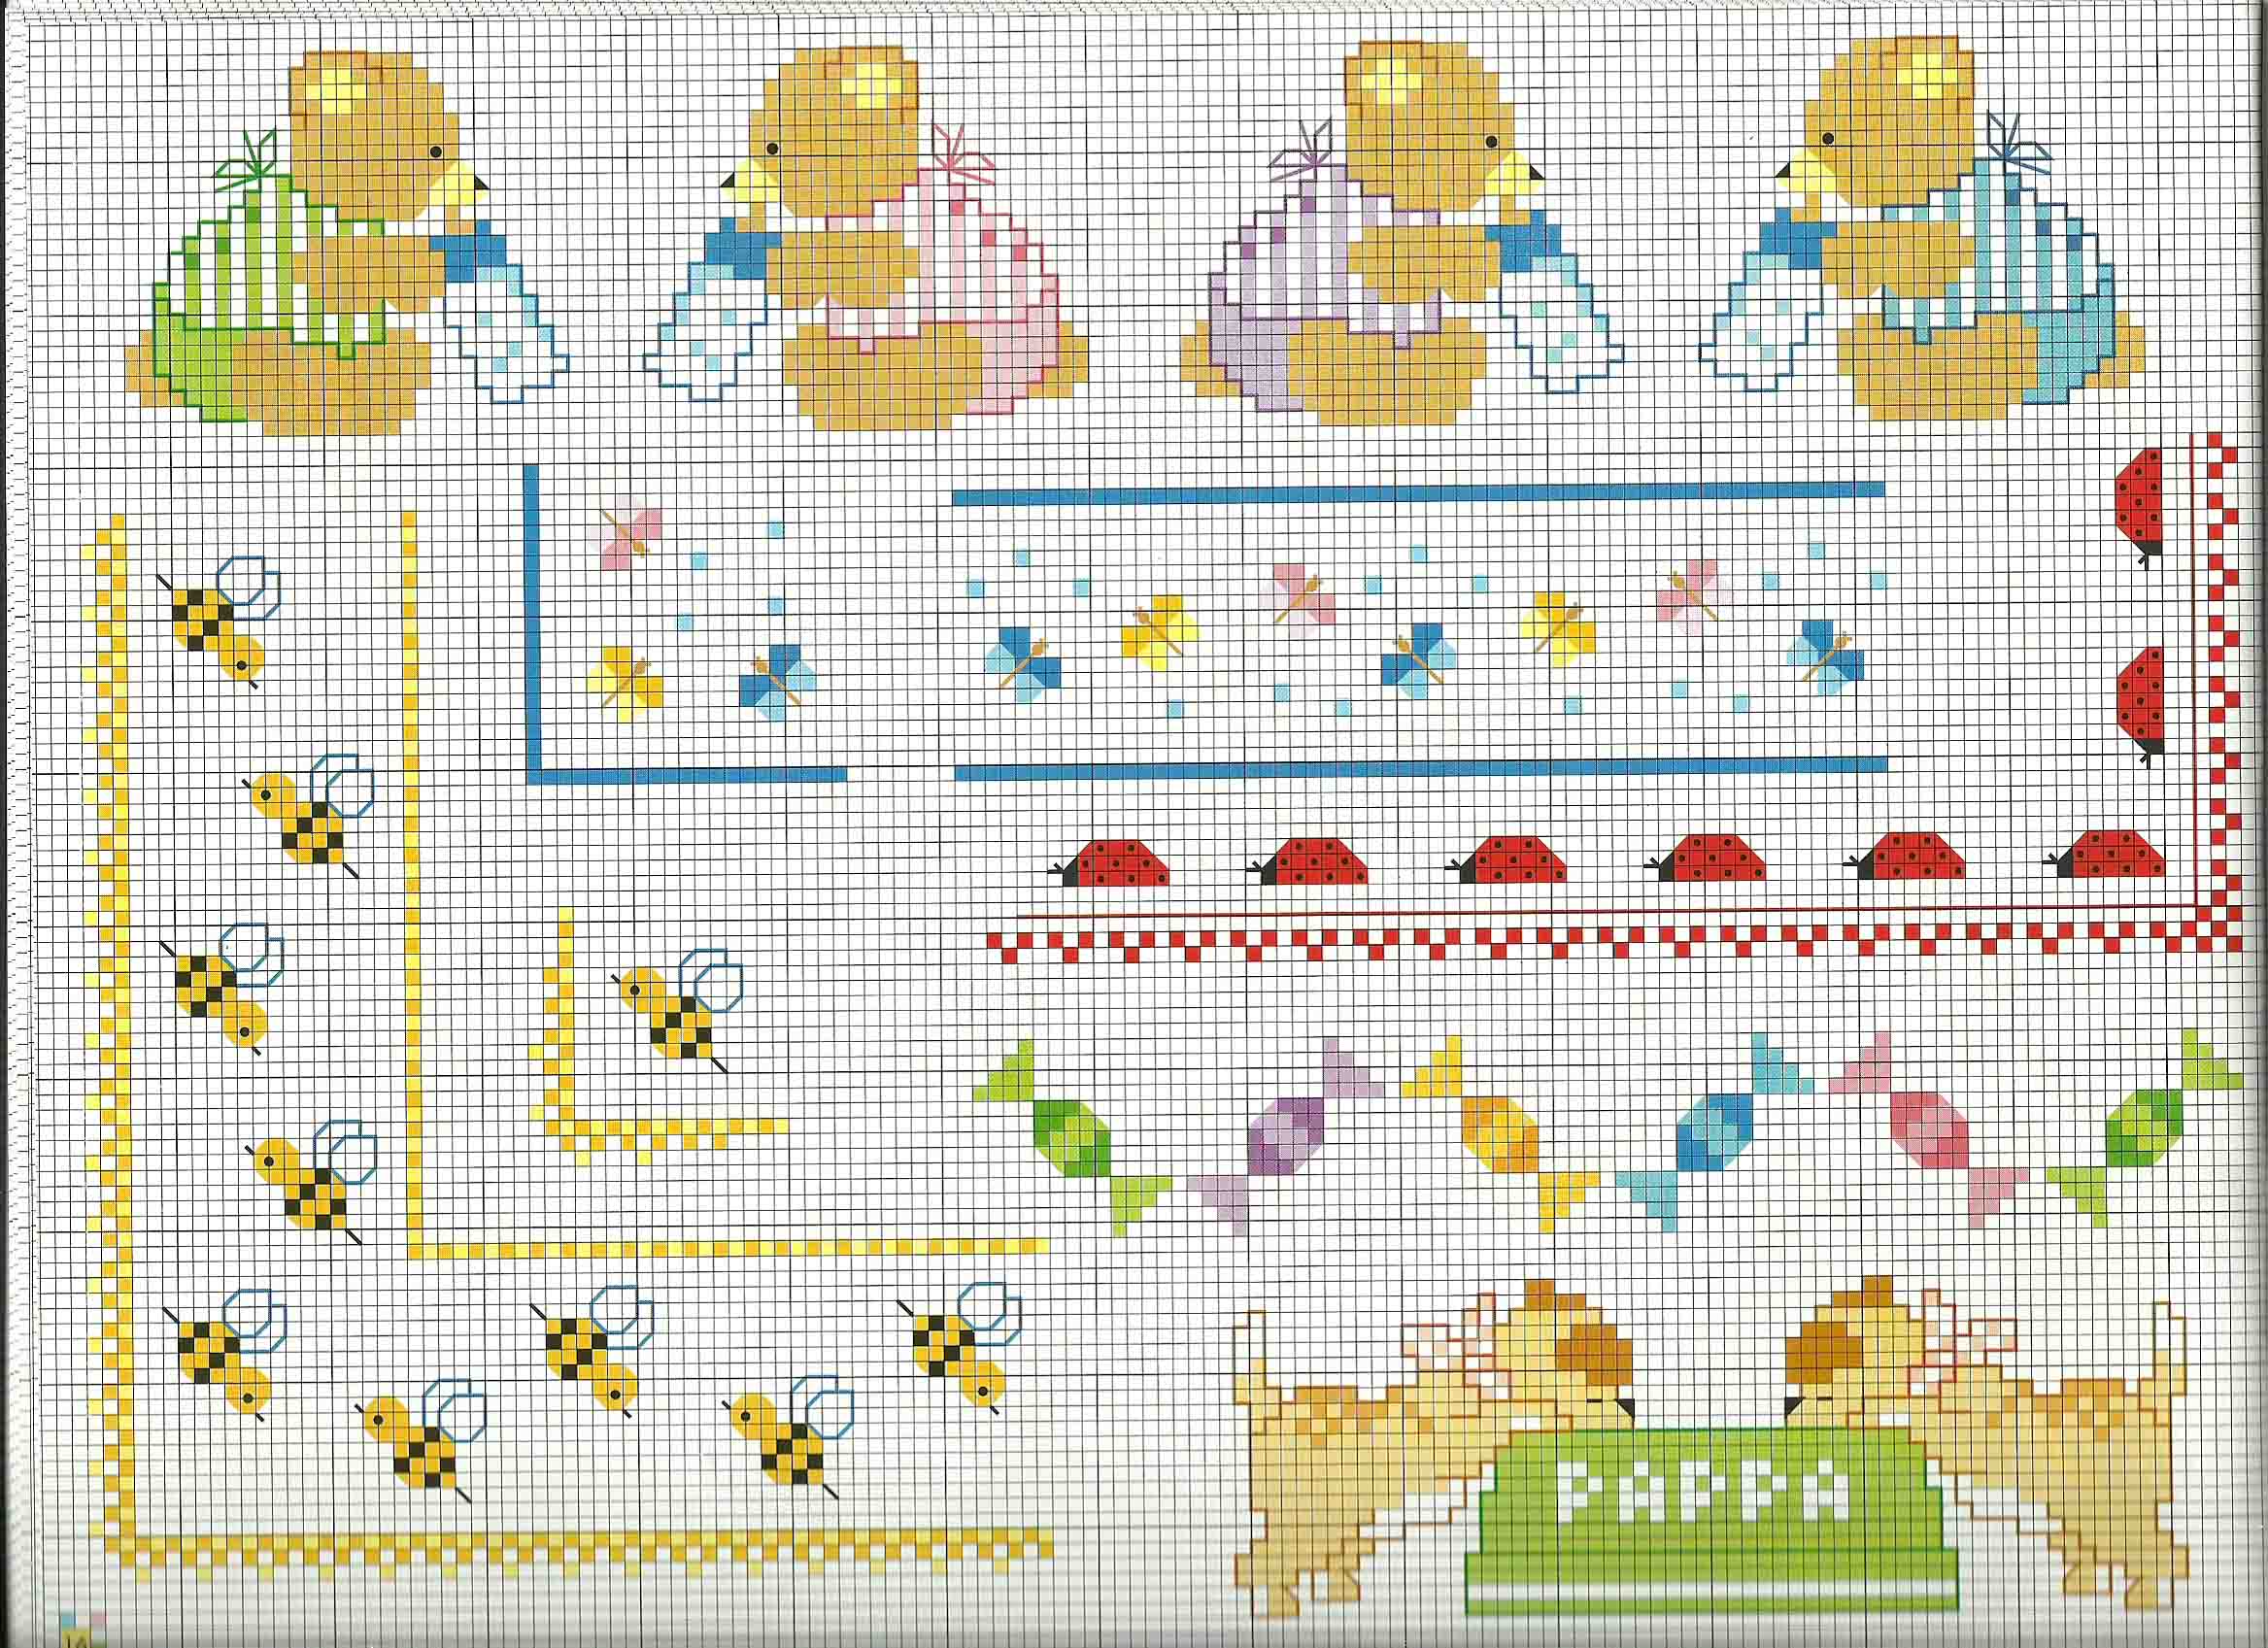 Ideas cross stitch borders for baby blankets